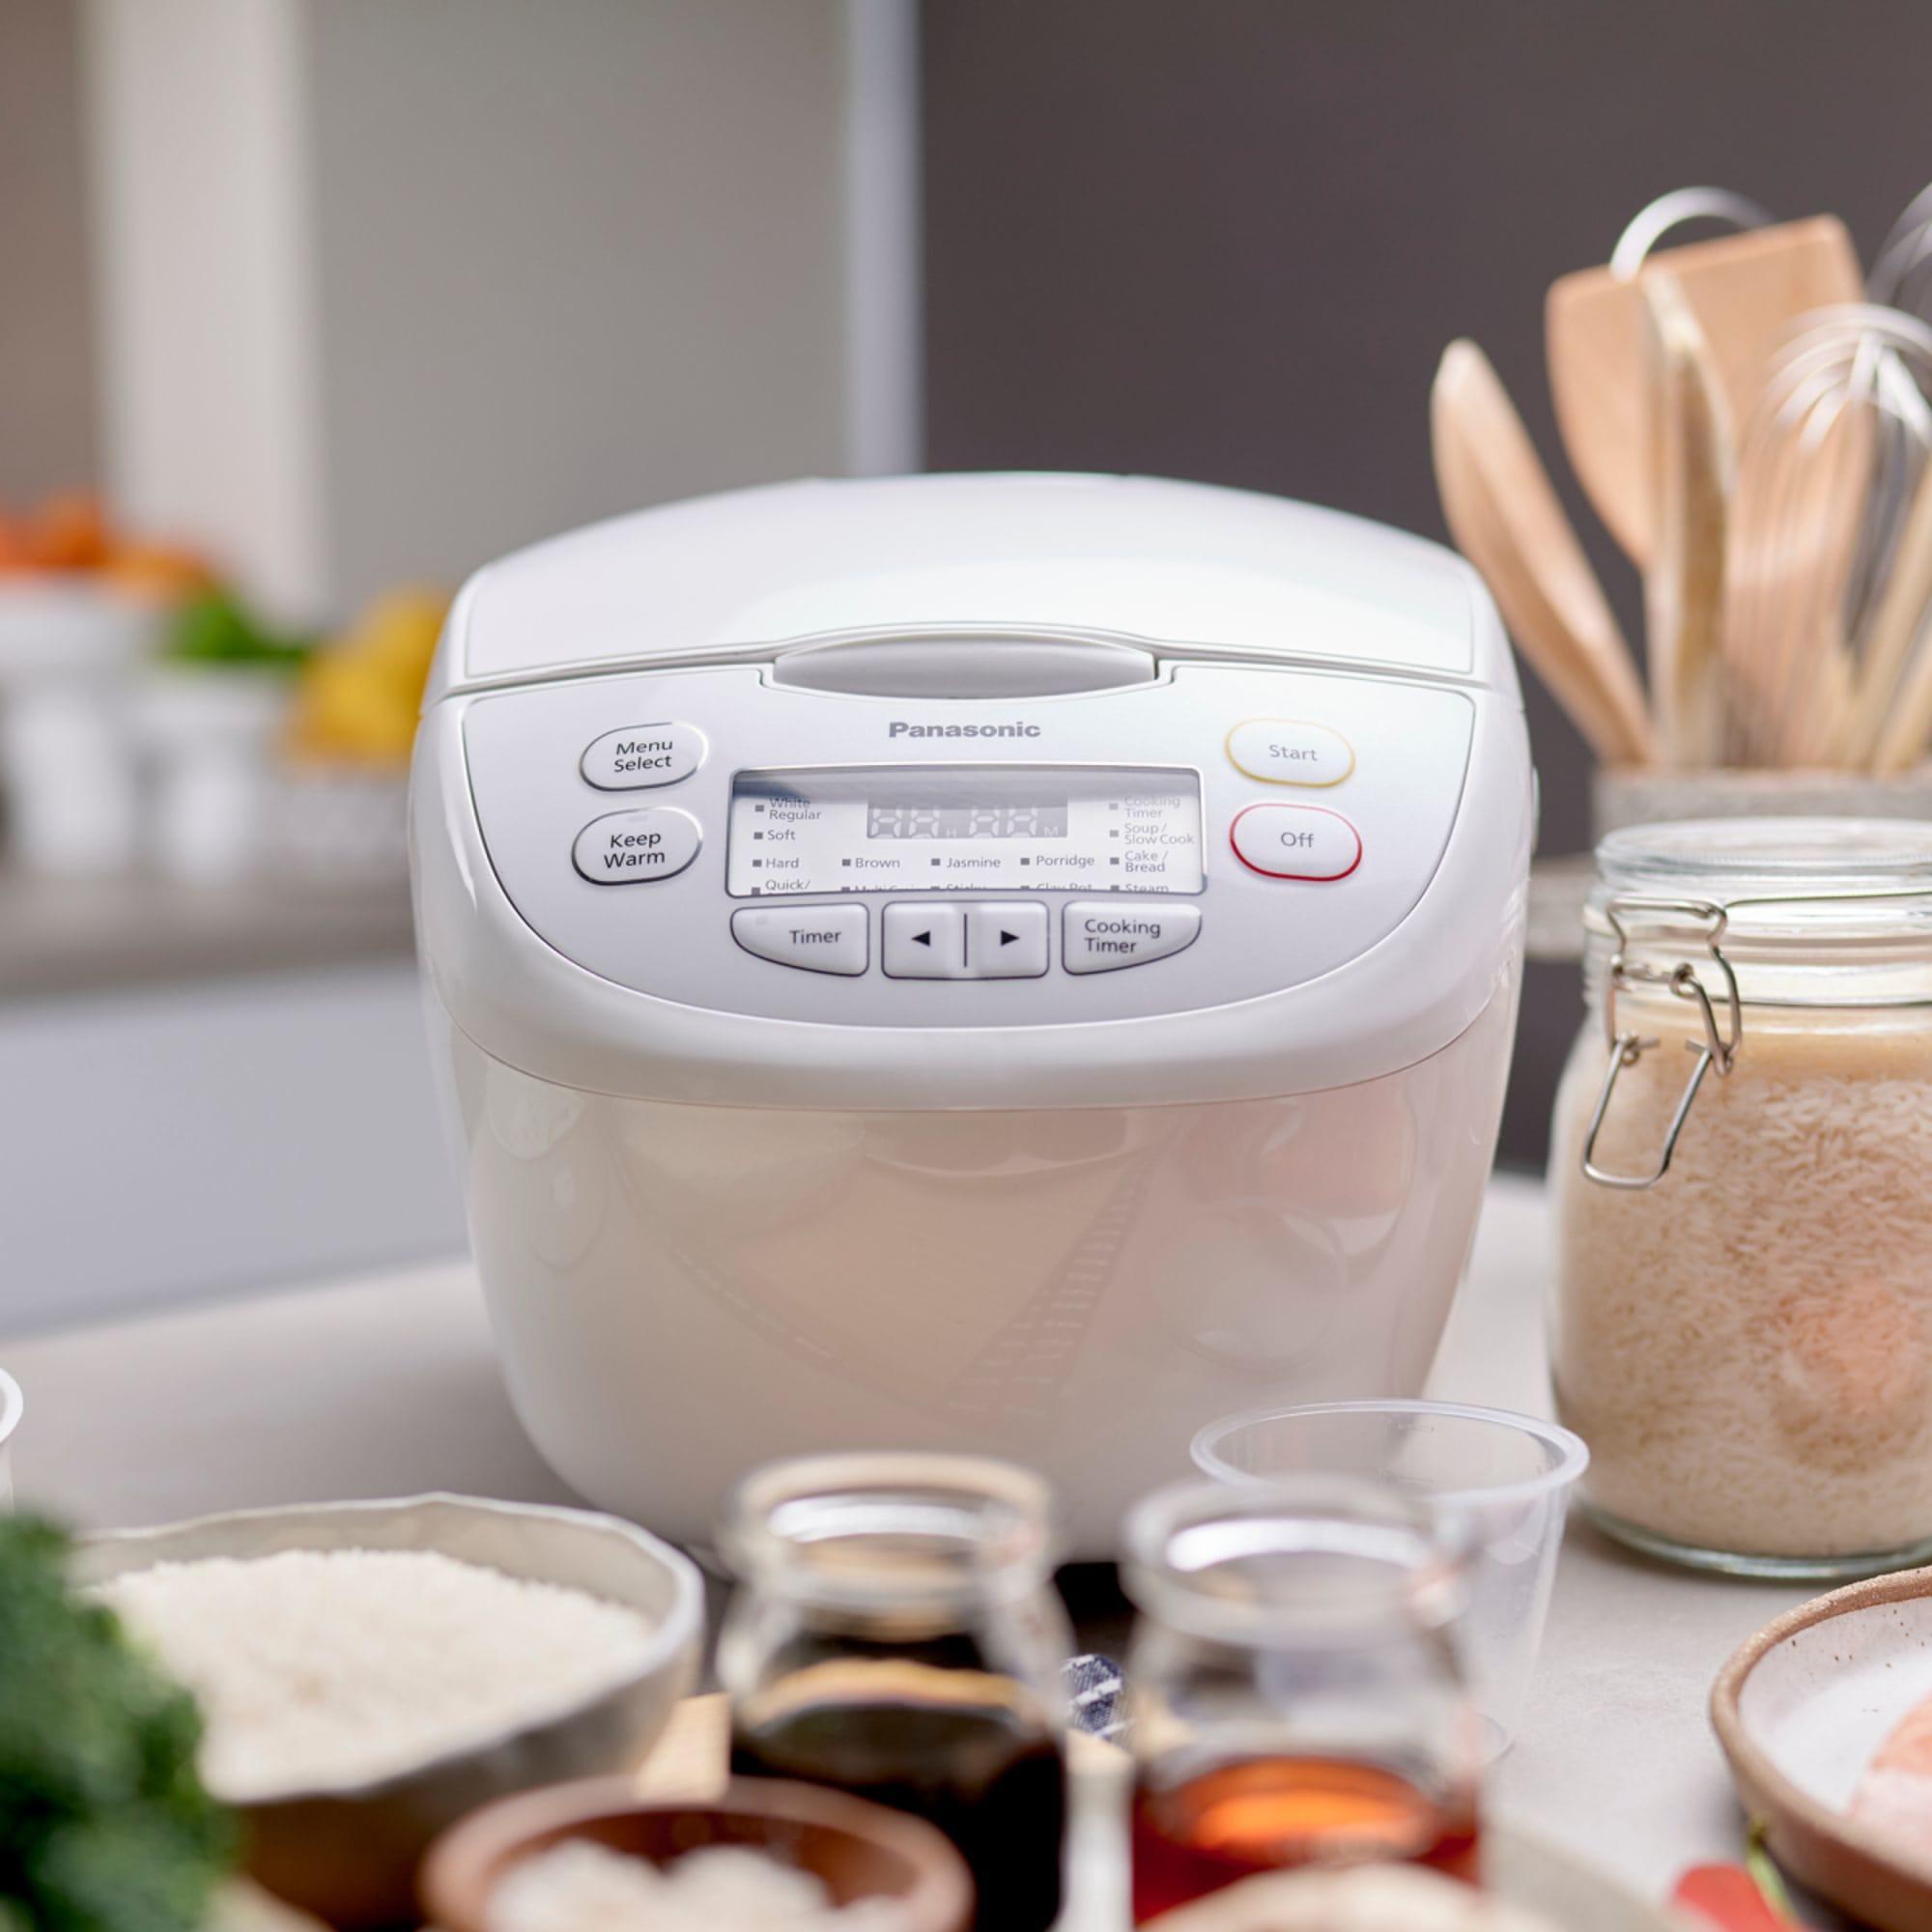 Panasonic Multi Function Rice Cooker 10 Cup White Image 2